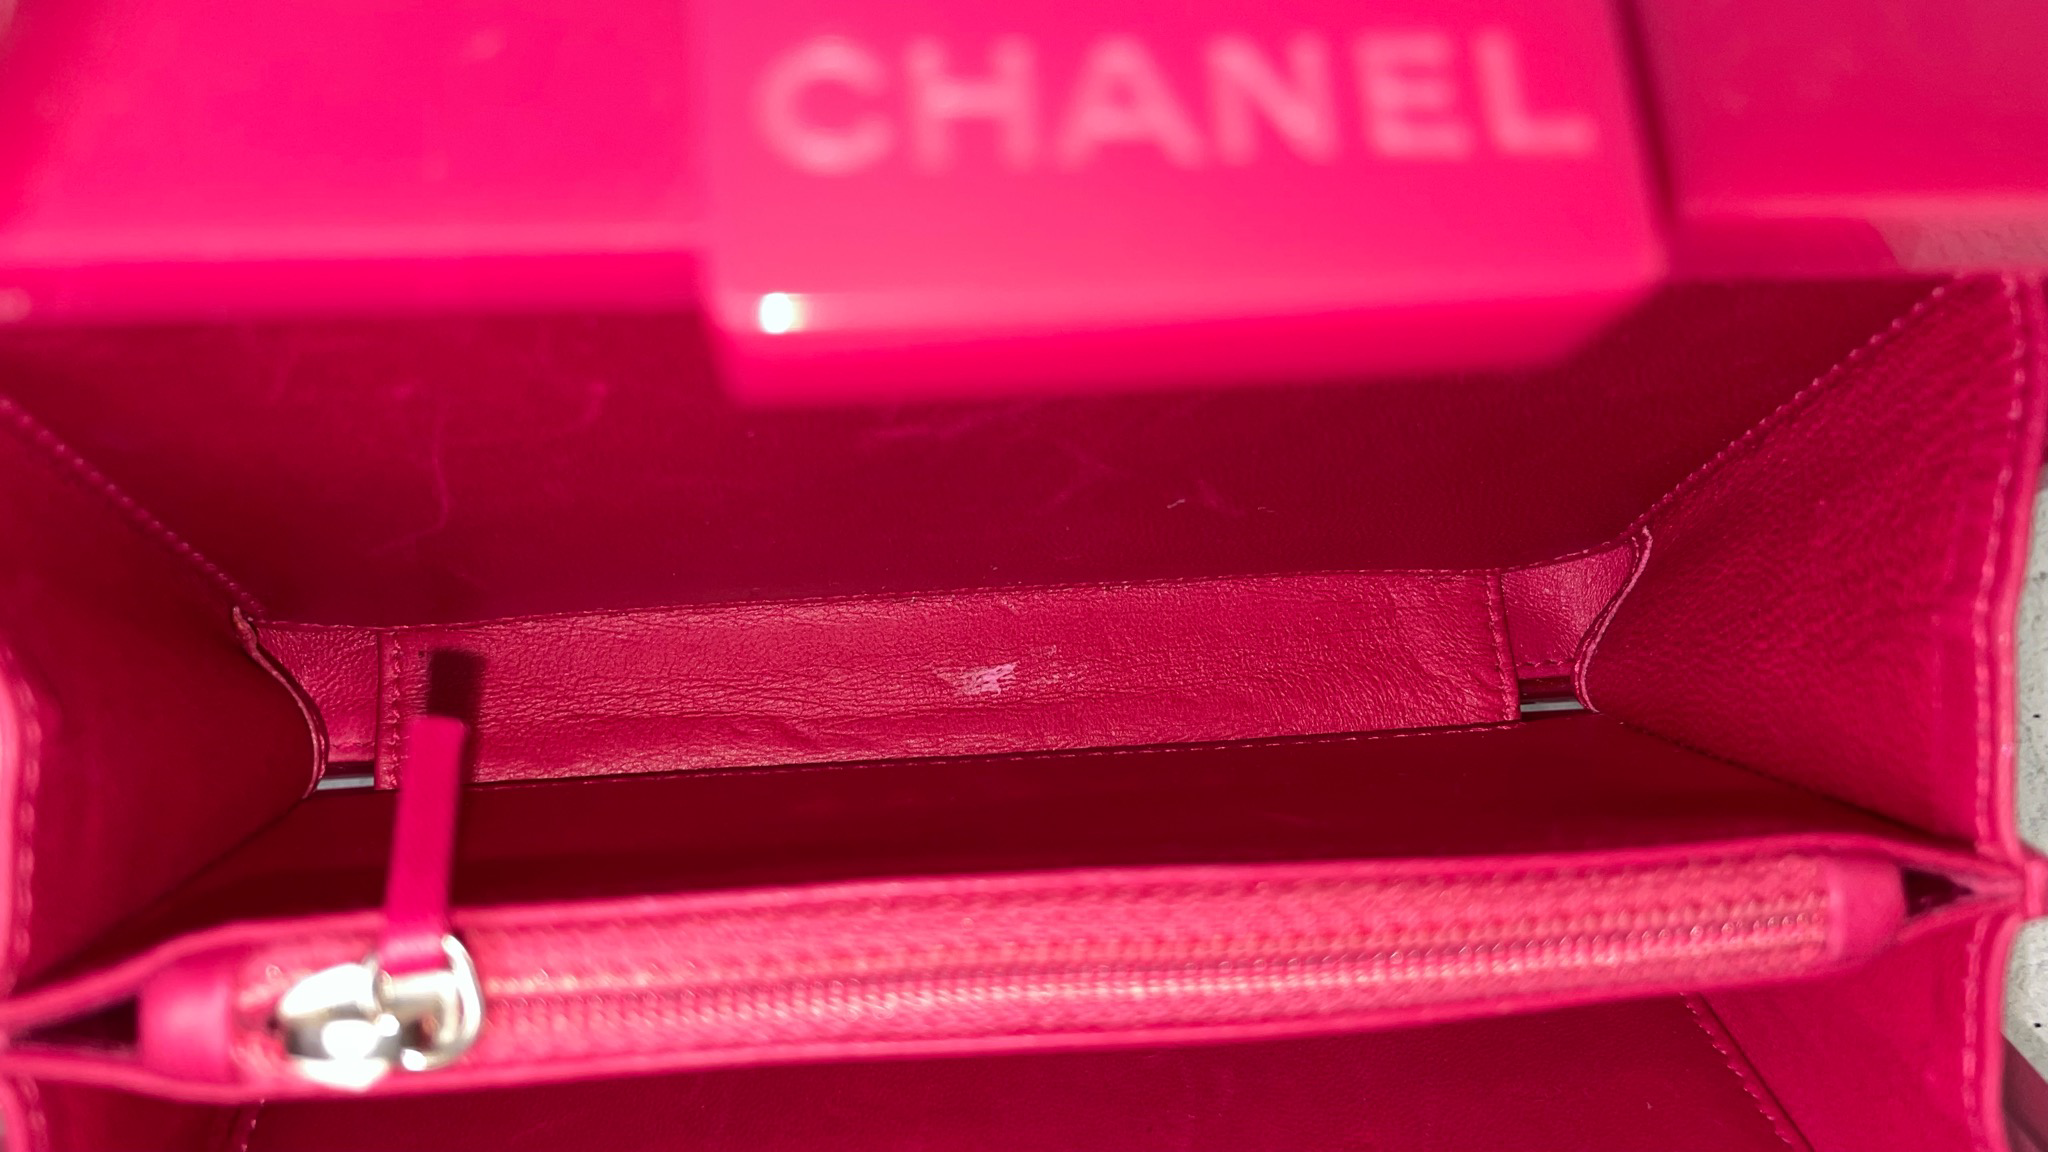 Chanel Lego Brick Bag, Bright Pink with Silver Hardware, Preowned